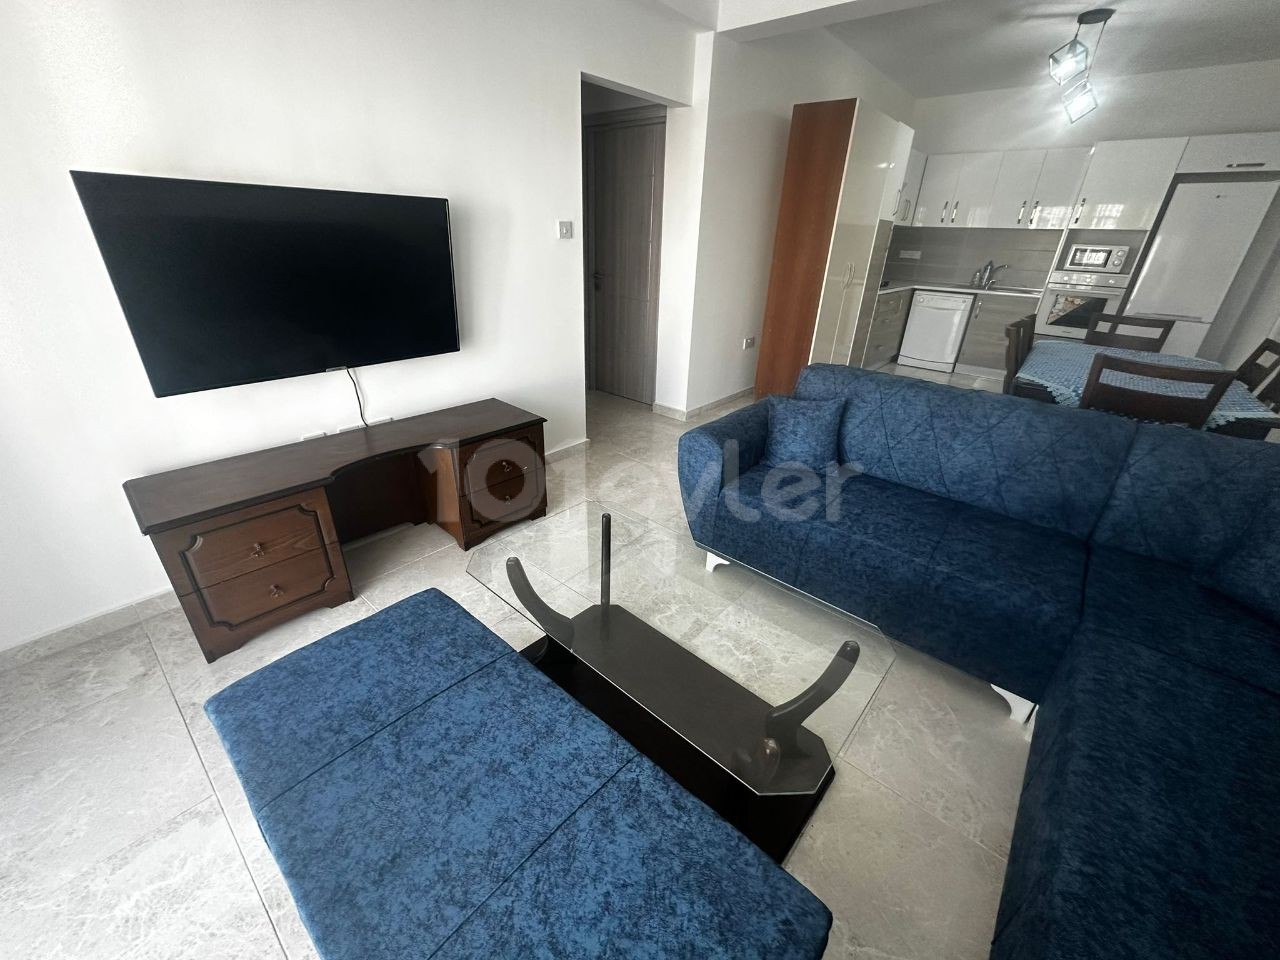 NEW NEW 2+1 FURNISHED FLAT FOR RENT IN KIZILBAŞ AREA